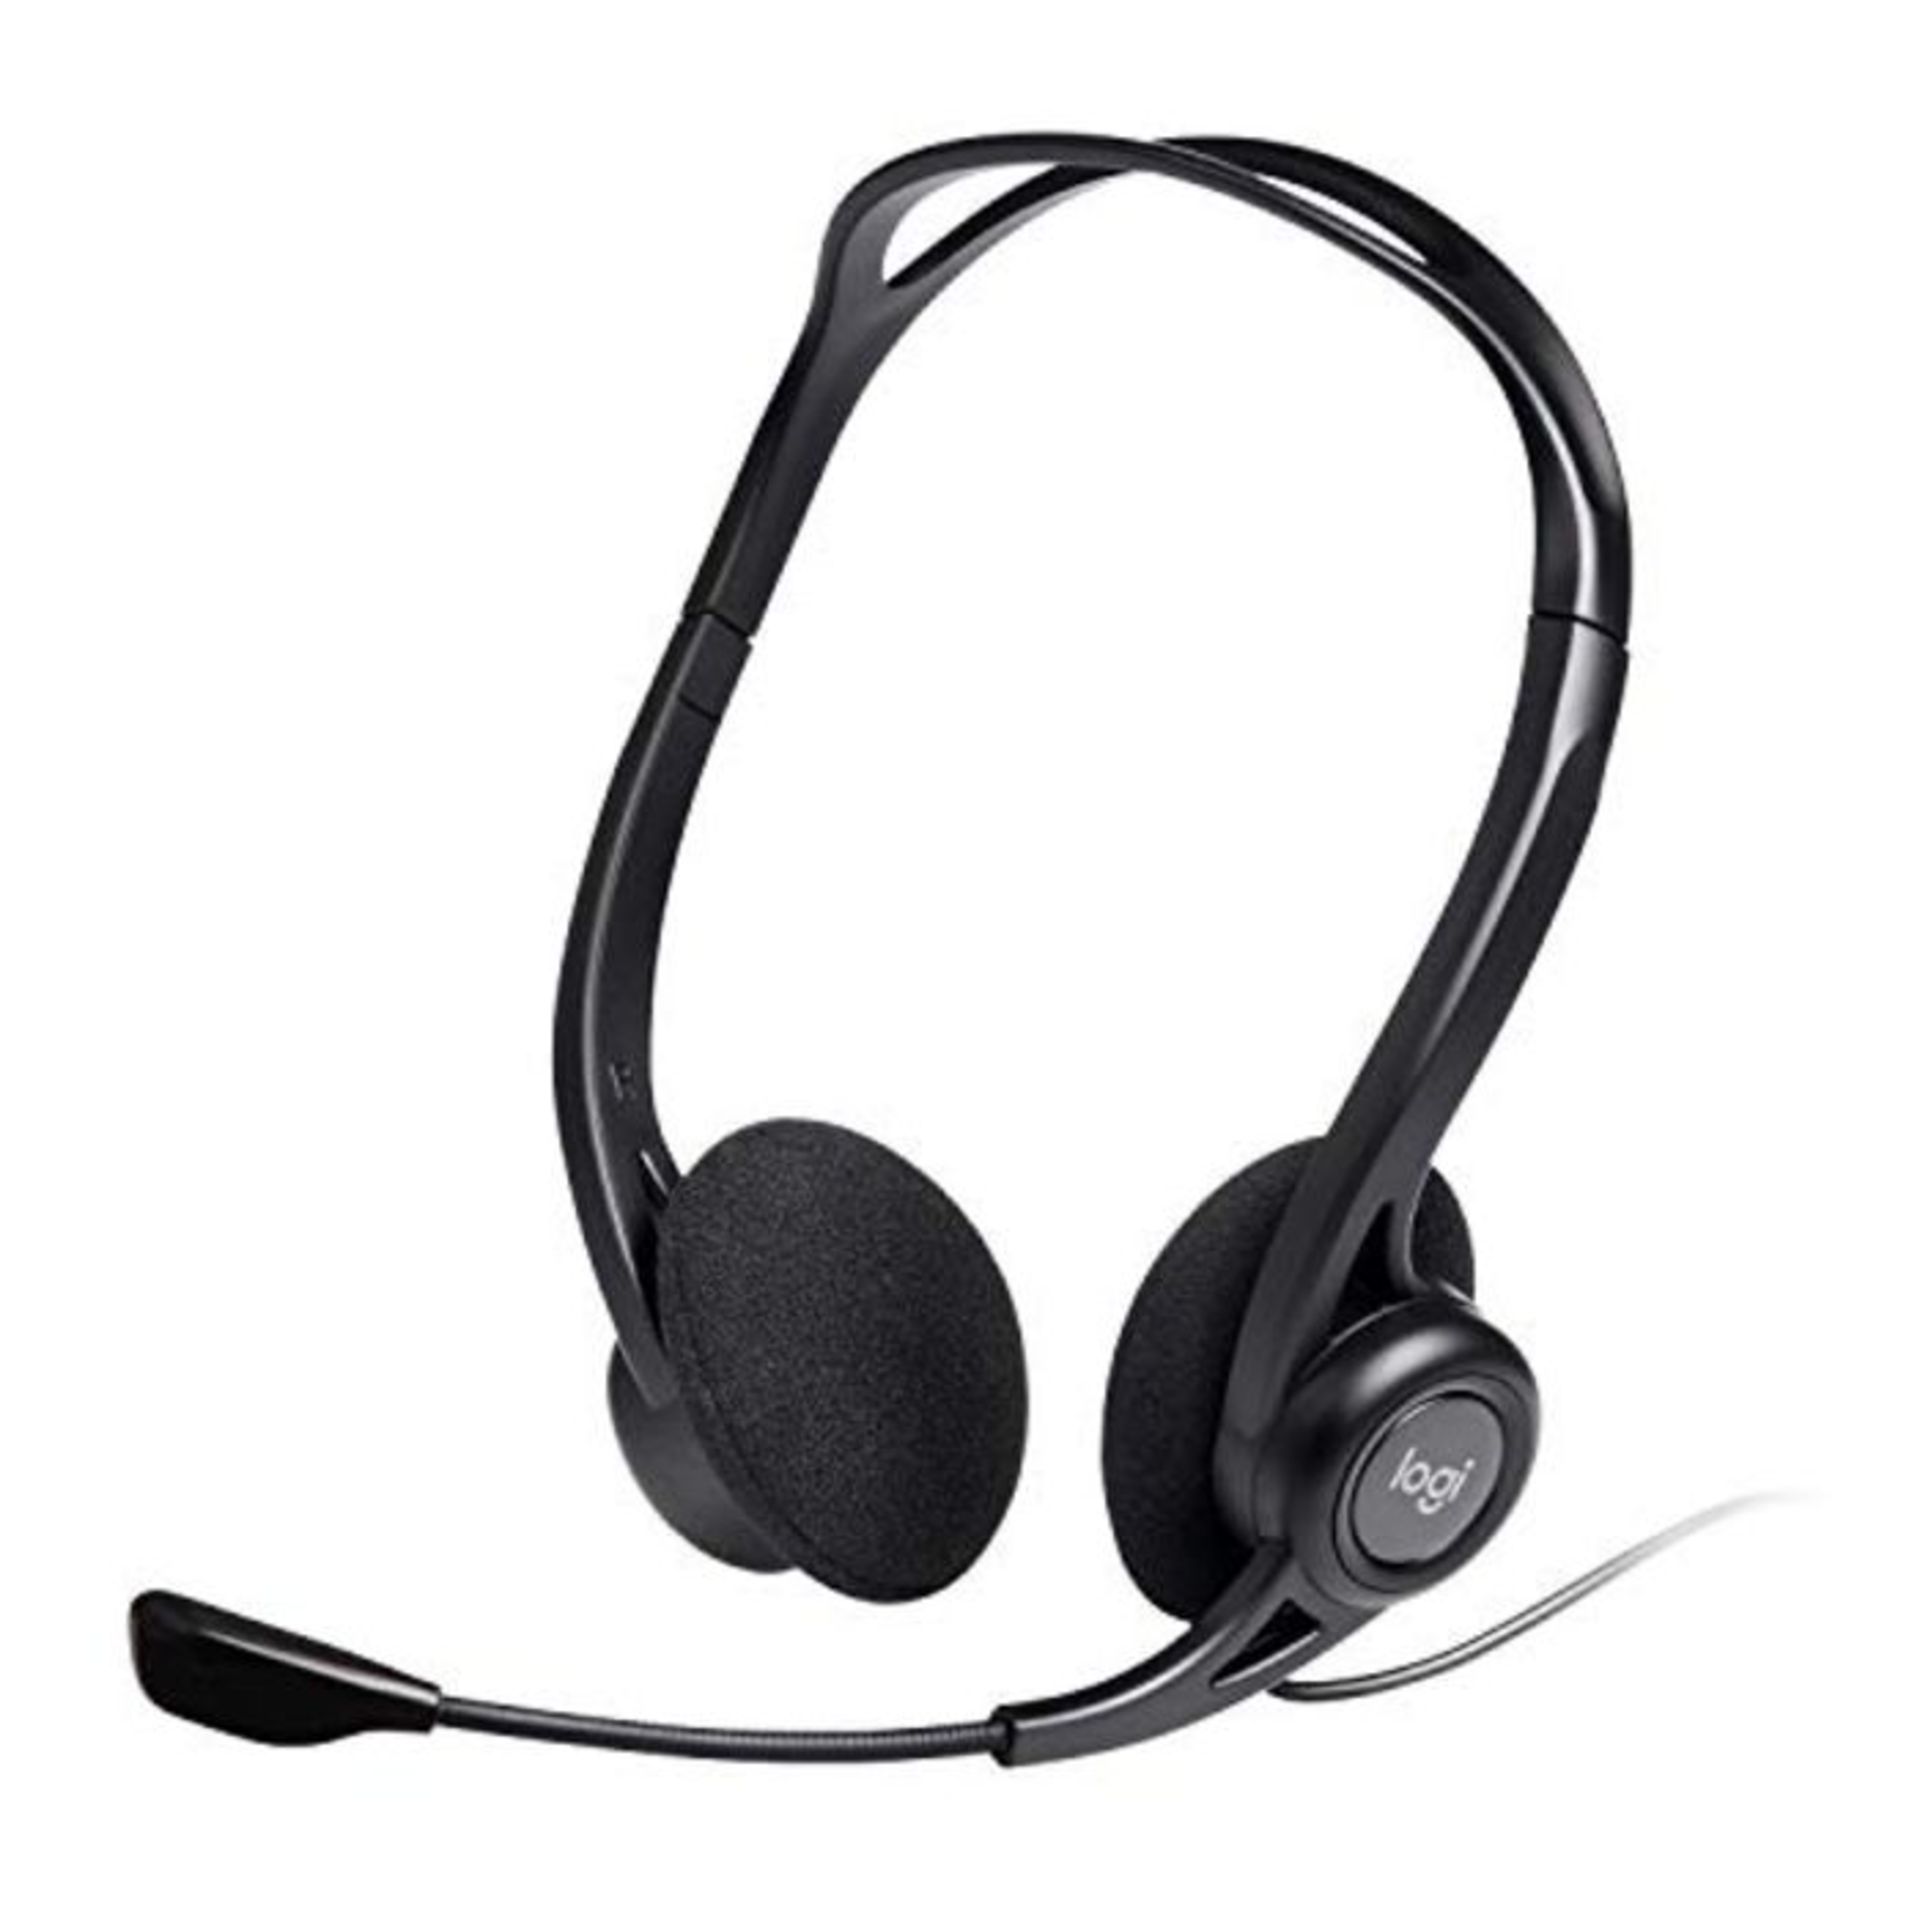 Logitech 960 Wired Headset, Stereo Headphones with Noise-Cancelling Microphone, USB, L